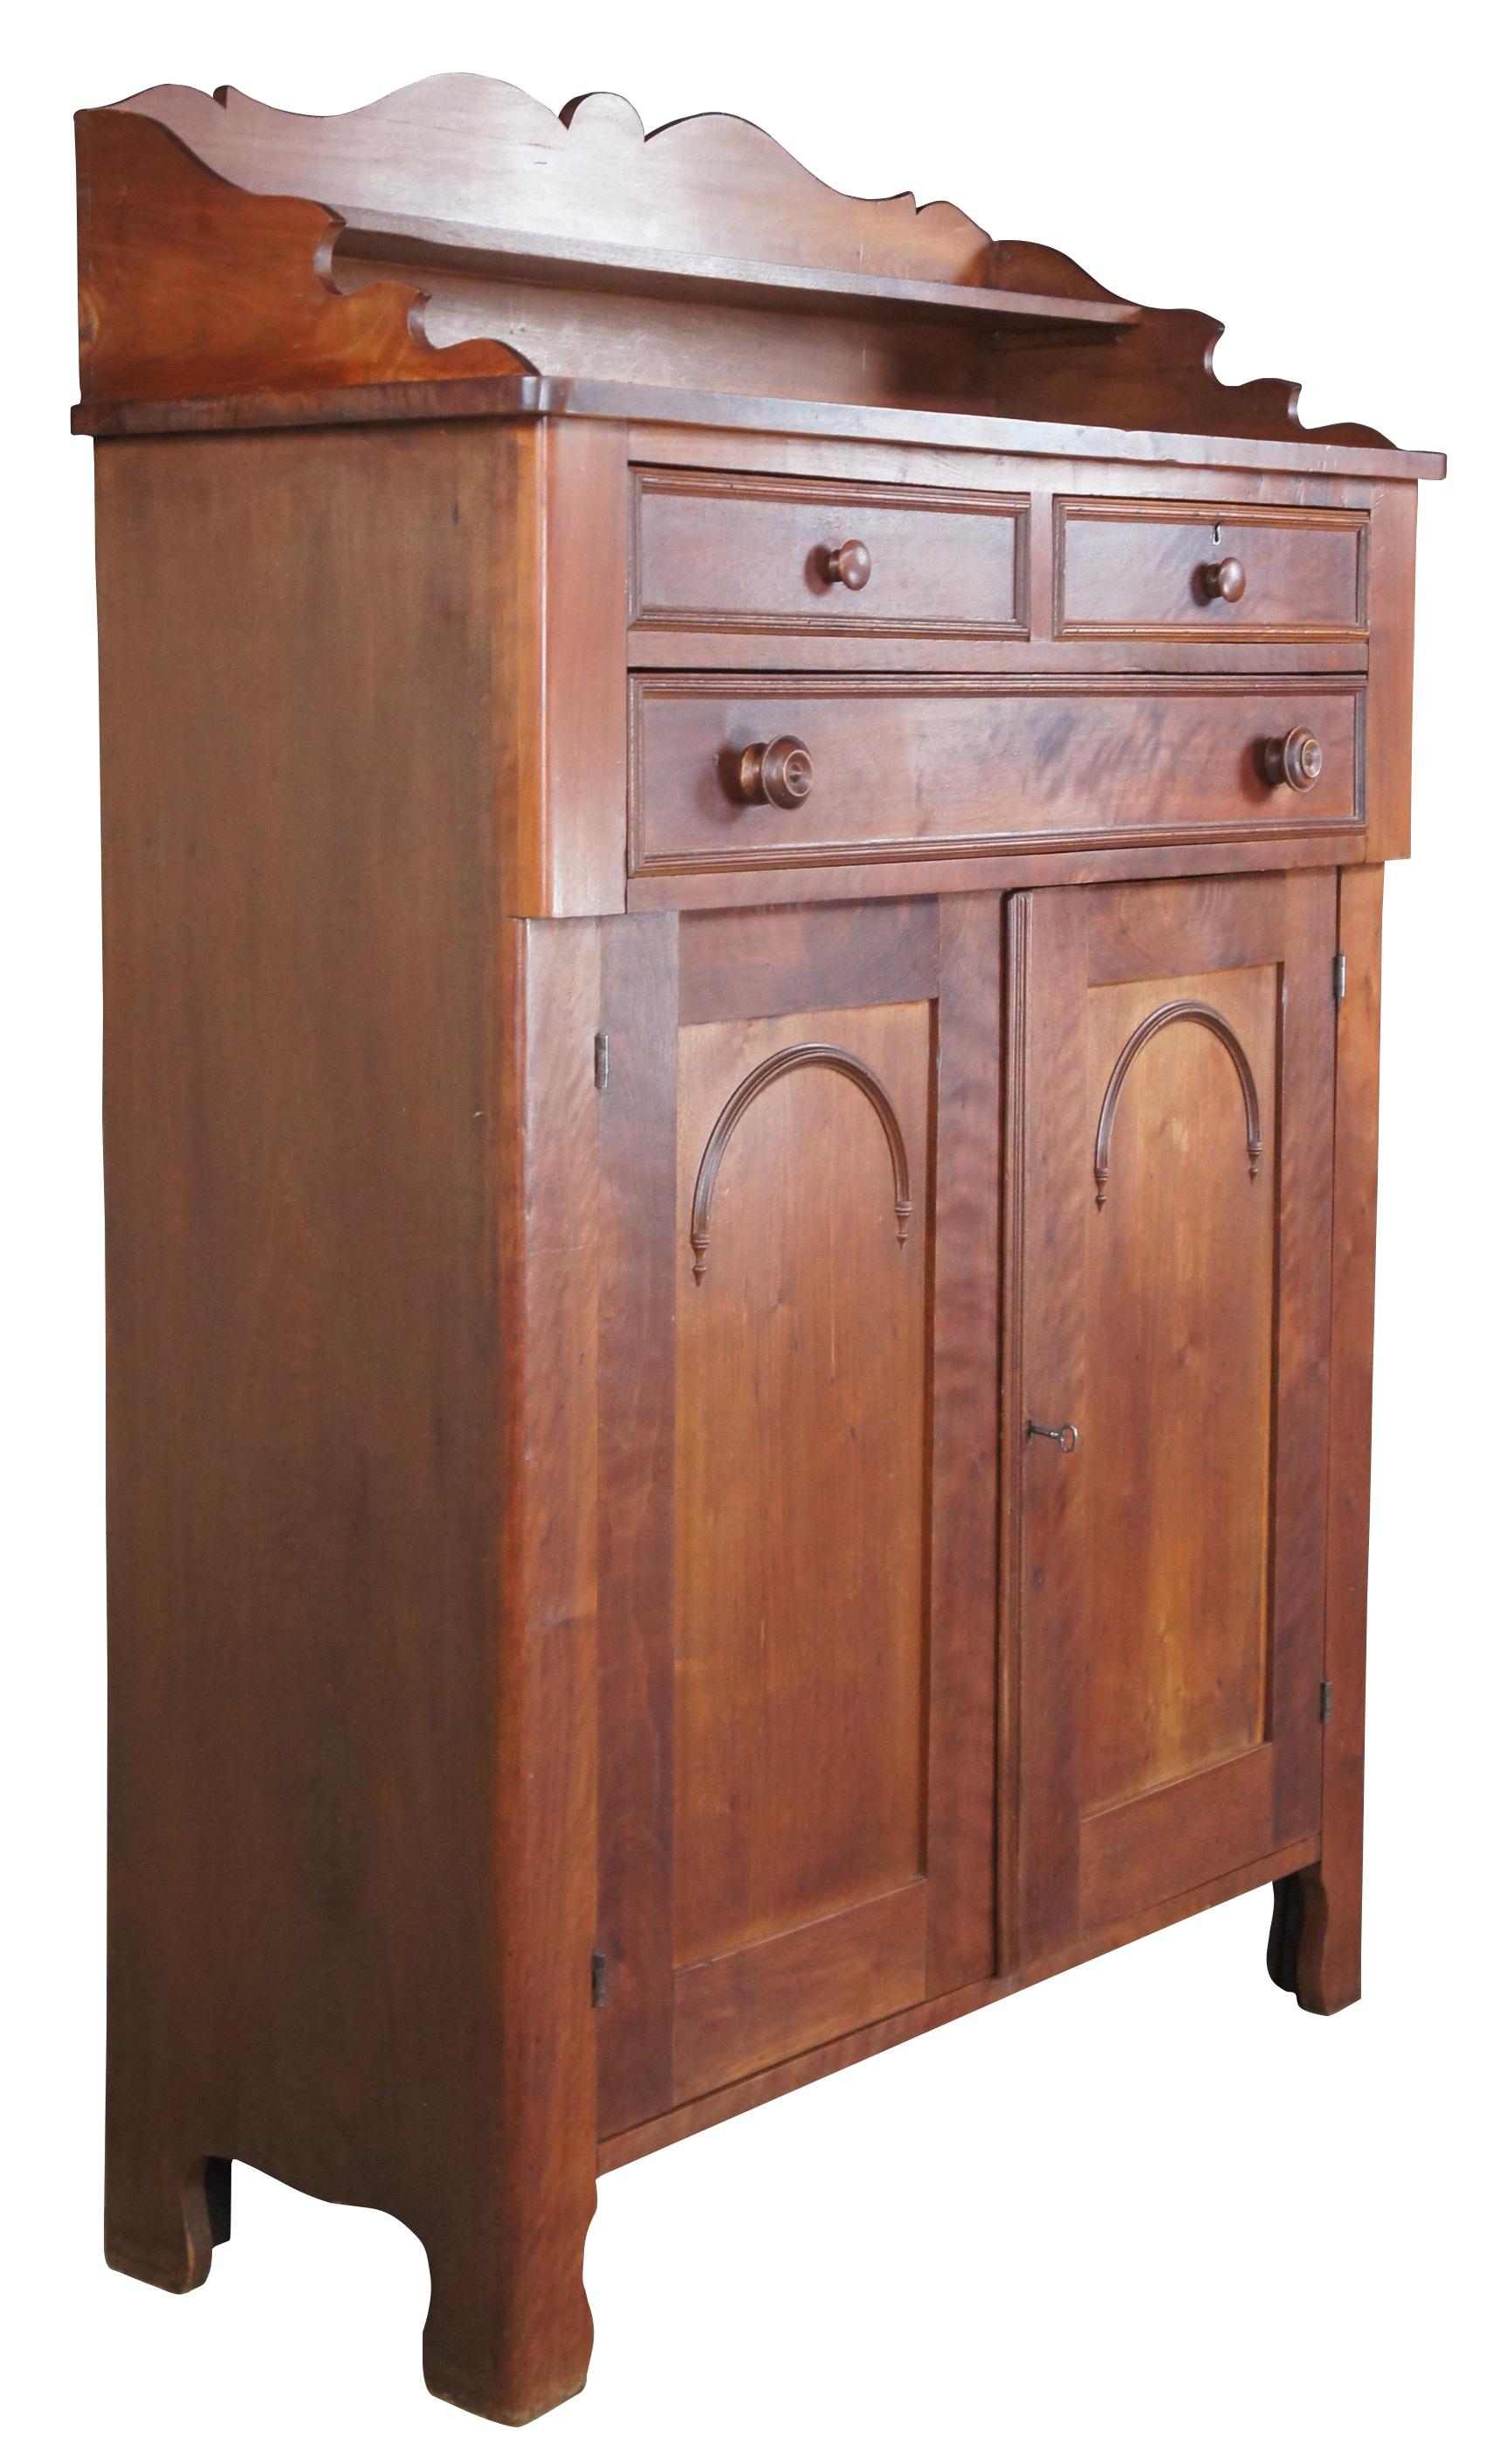 American Classical 1850s Antique Early American Walnut Country Farmhouse Jelly Cabinet Cupboard